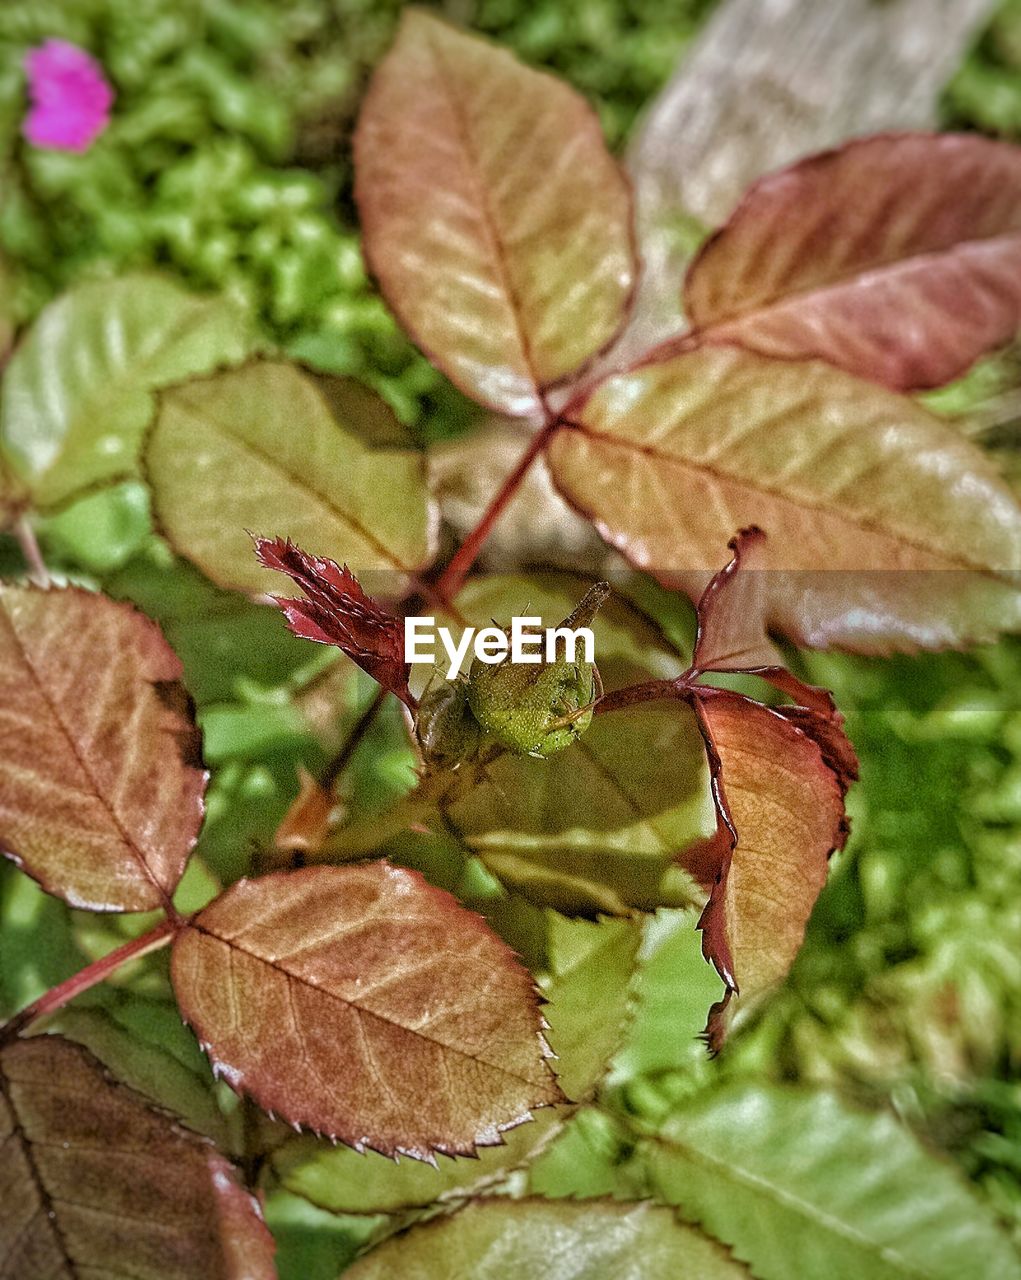 CLOSE-UP OF GREEN LEAVES ON PLANT